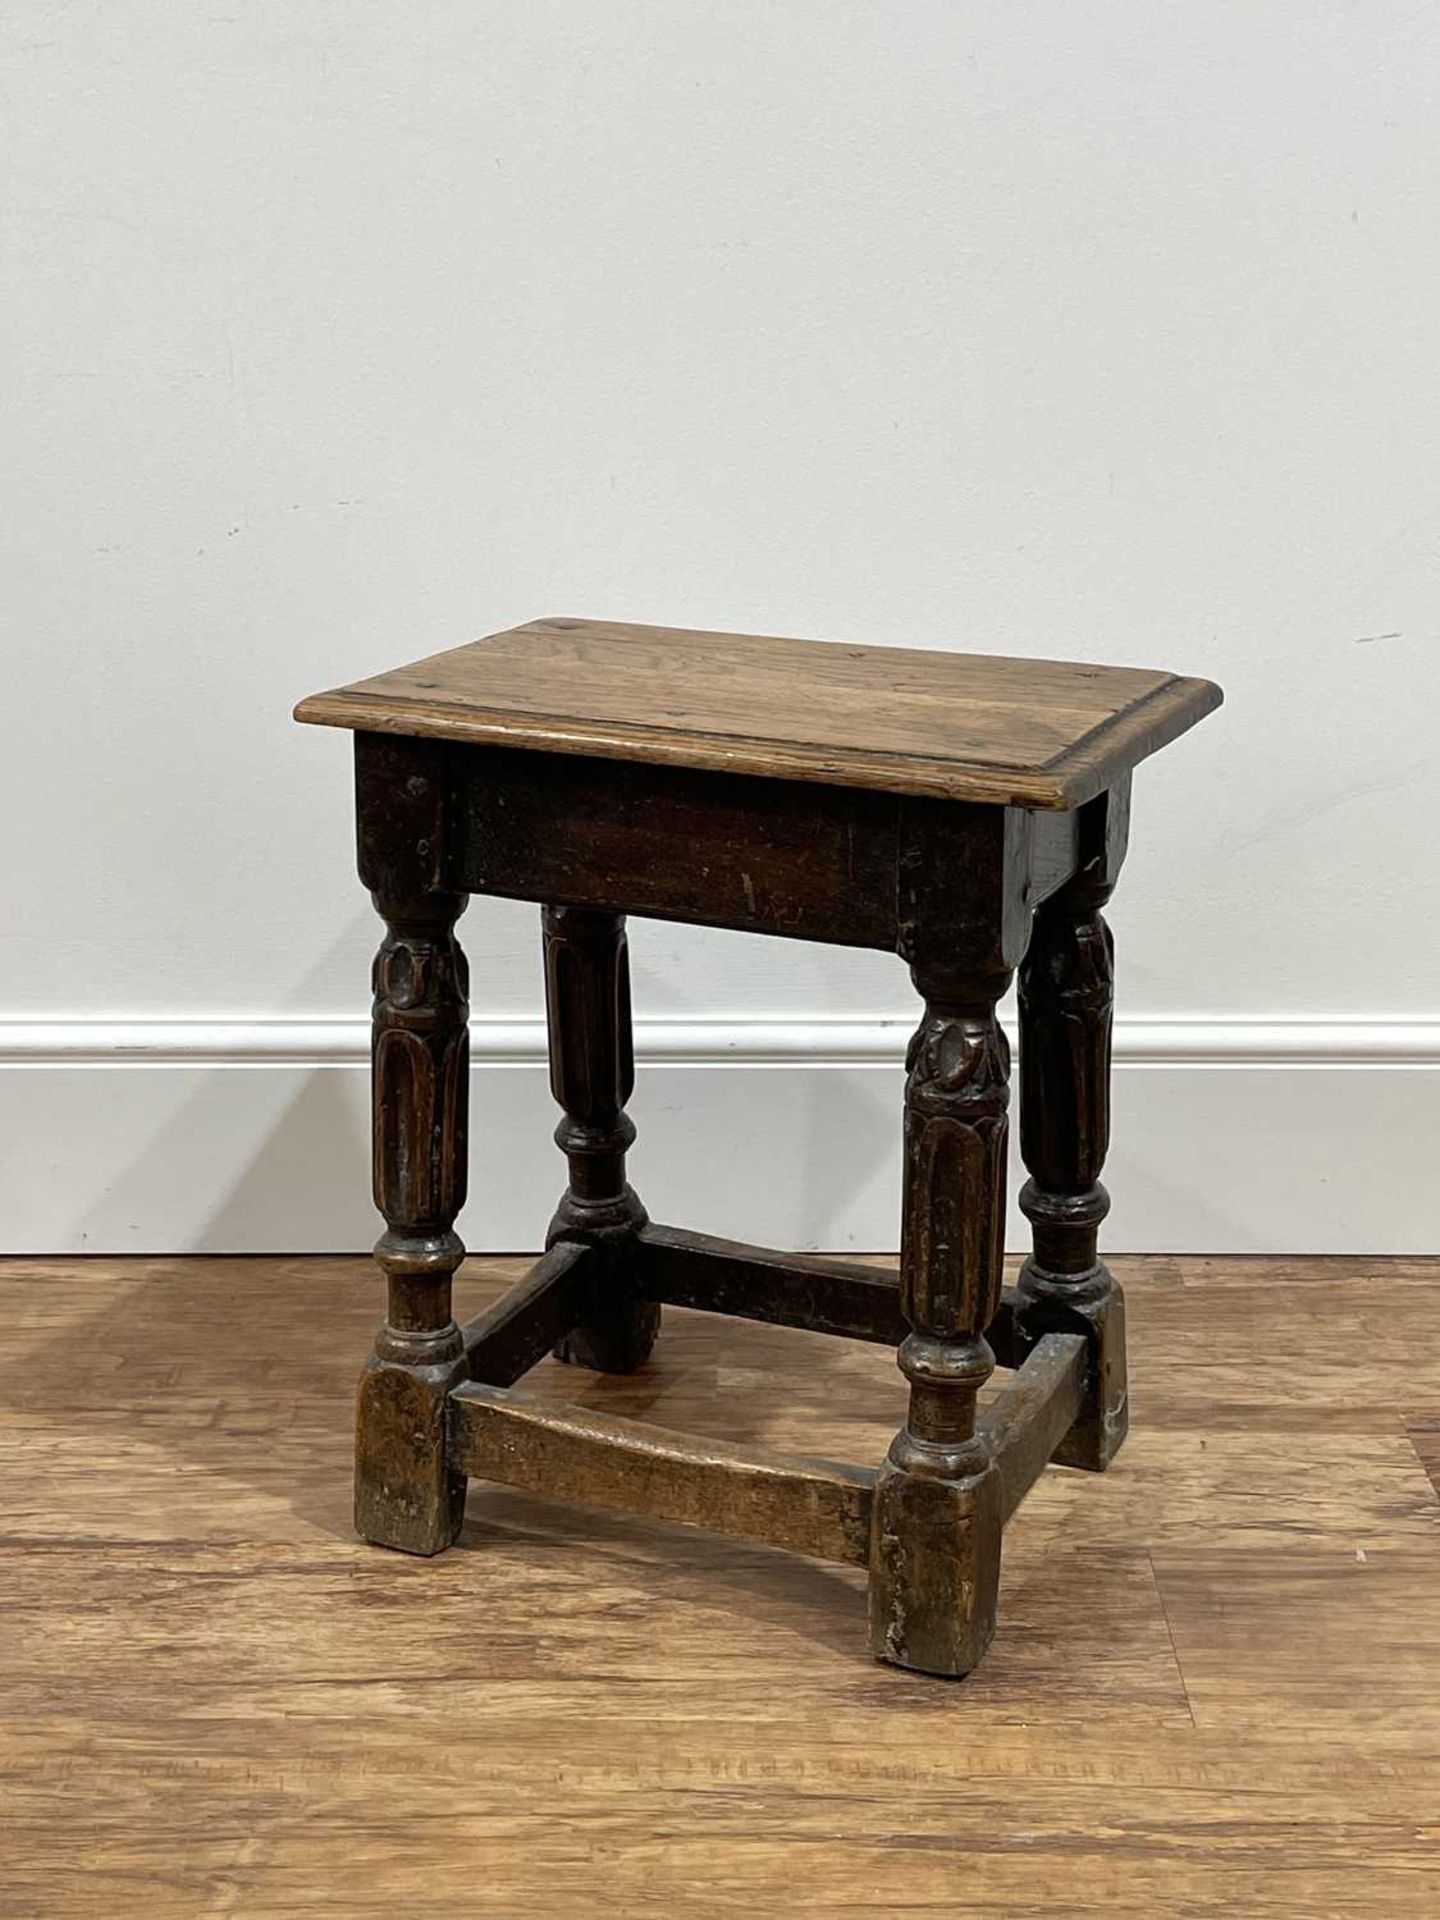 Oak joint stool 18th Century, with carved decoration, 43cm x 27.5cm x 48cm Provenance: The